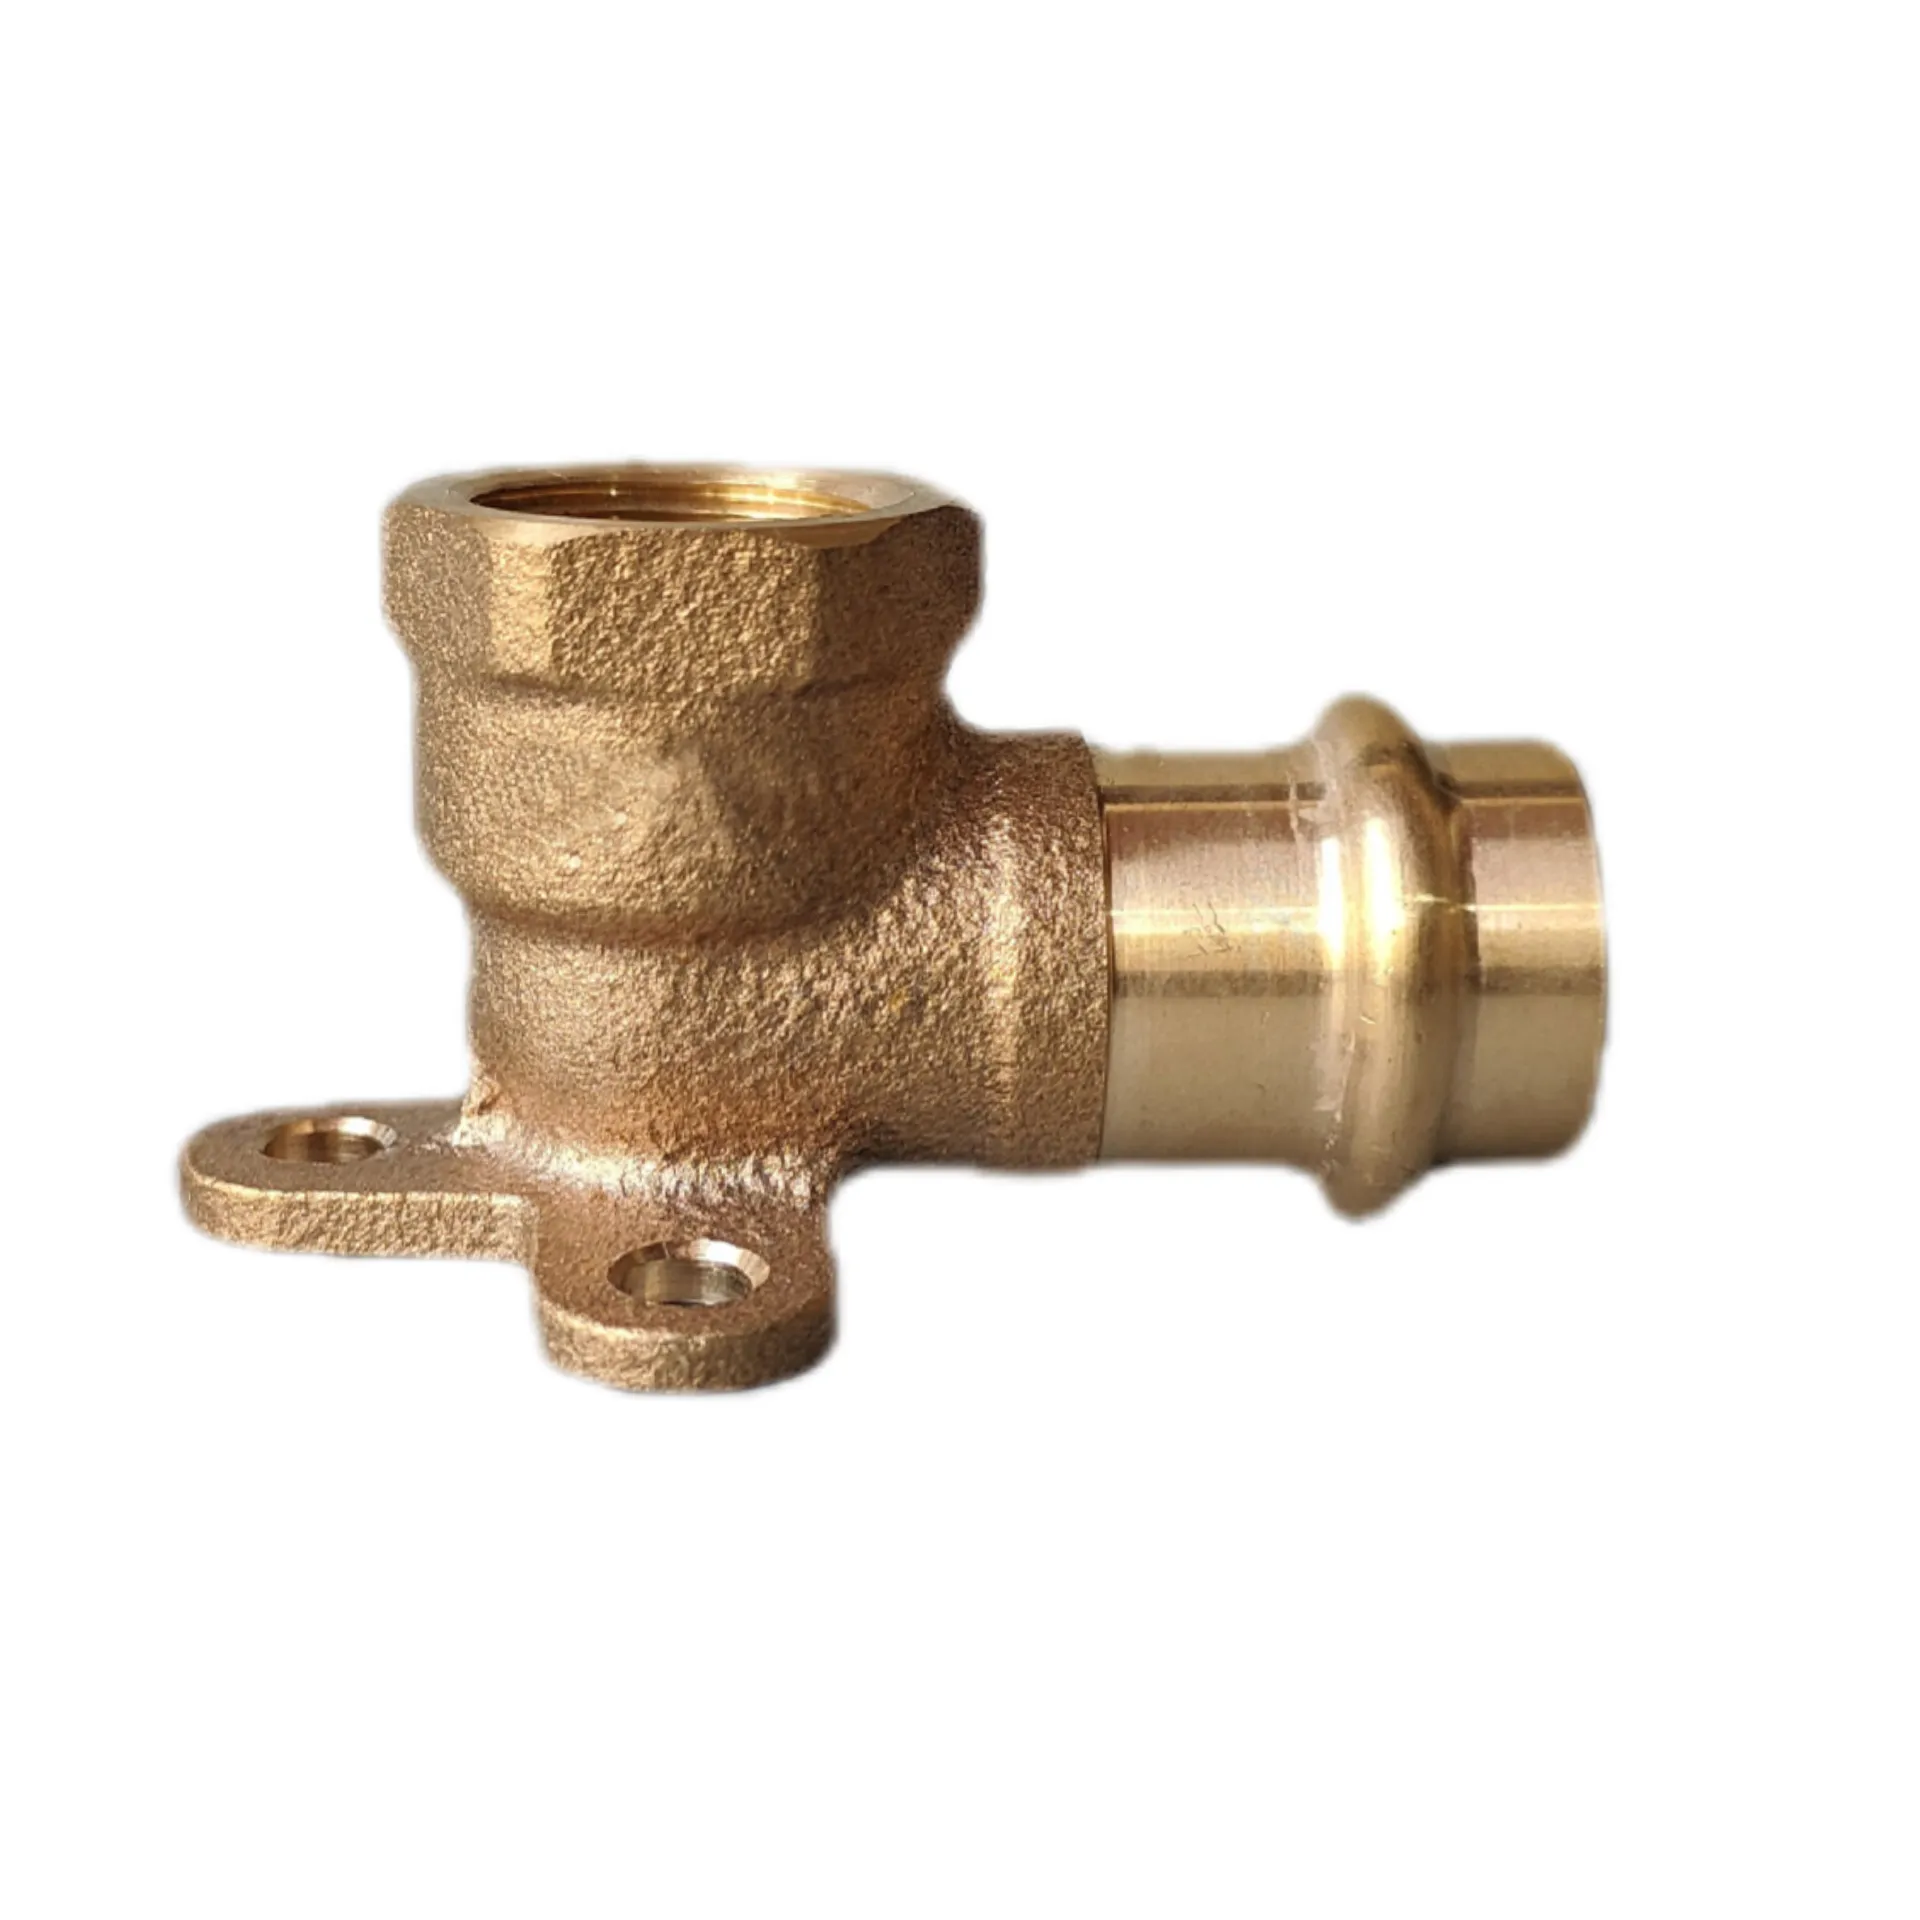 sanitary Copper 90 degree Elbow with seat joint pipe fitting